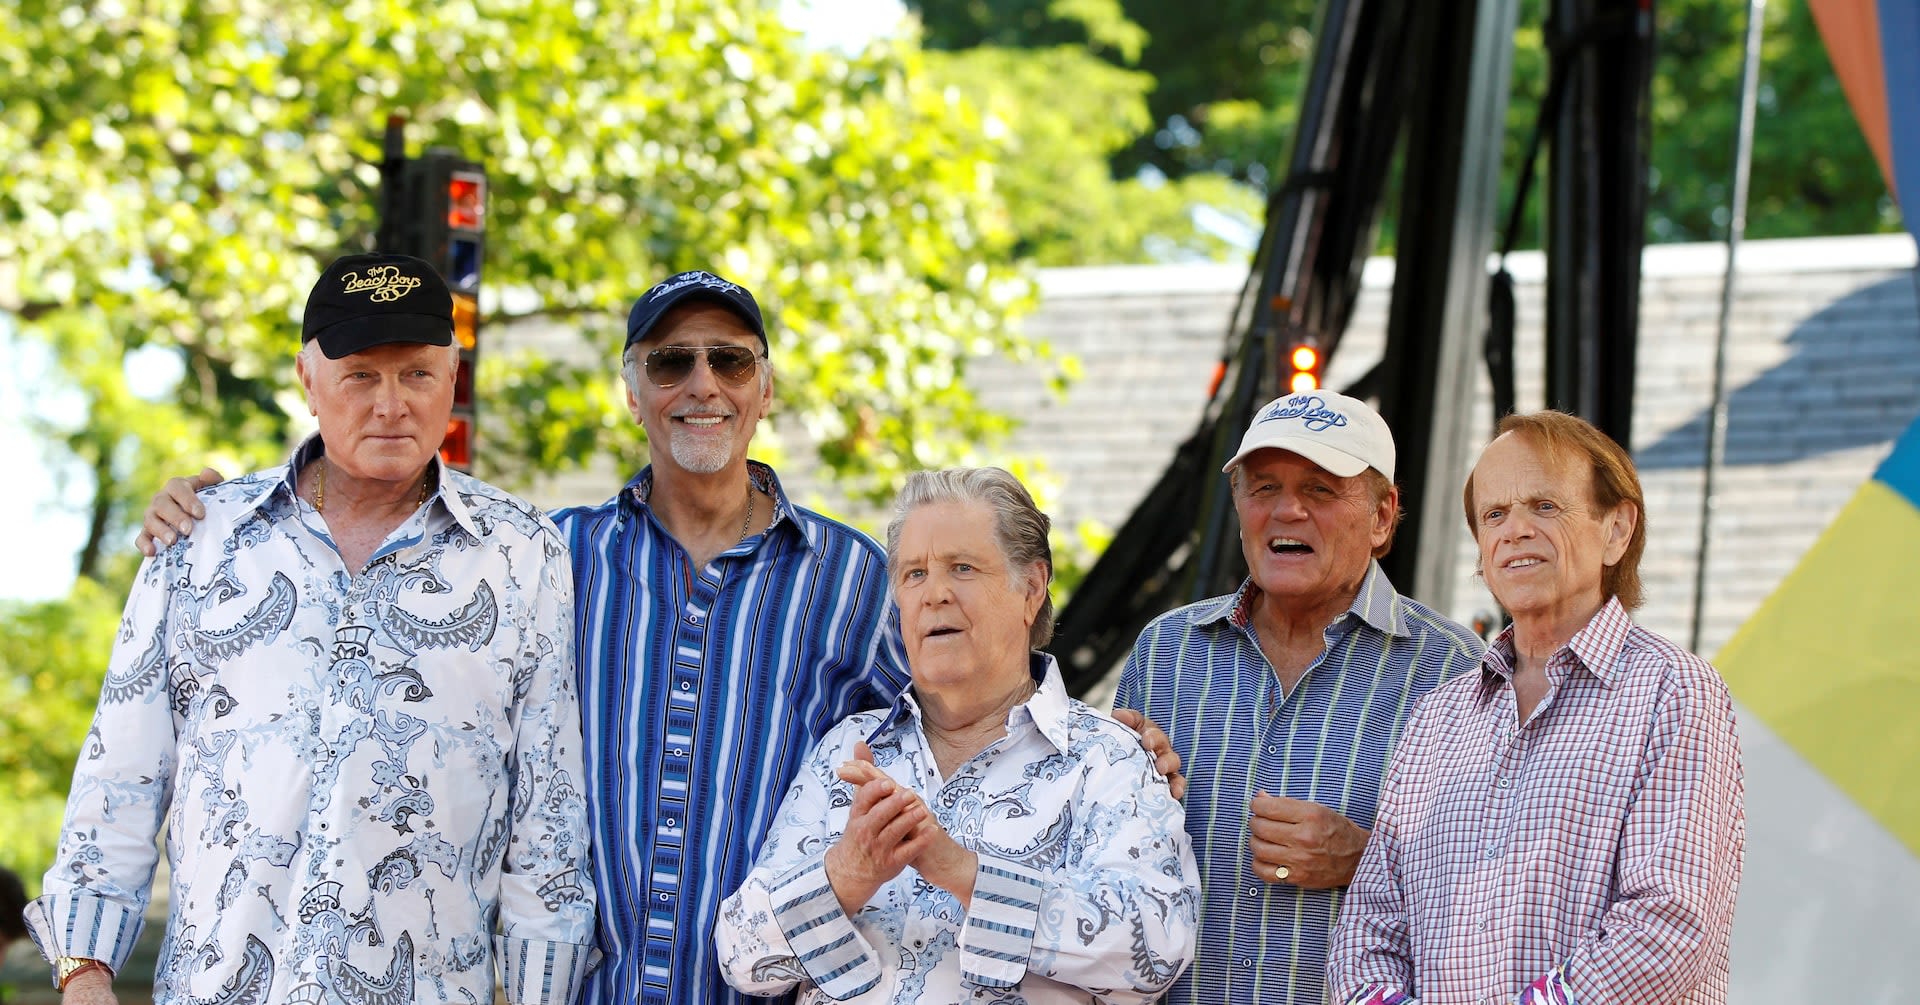 Beach Boys book covers 60 years of sun, surf and Good Vibrations